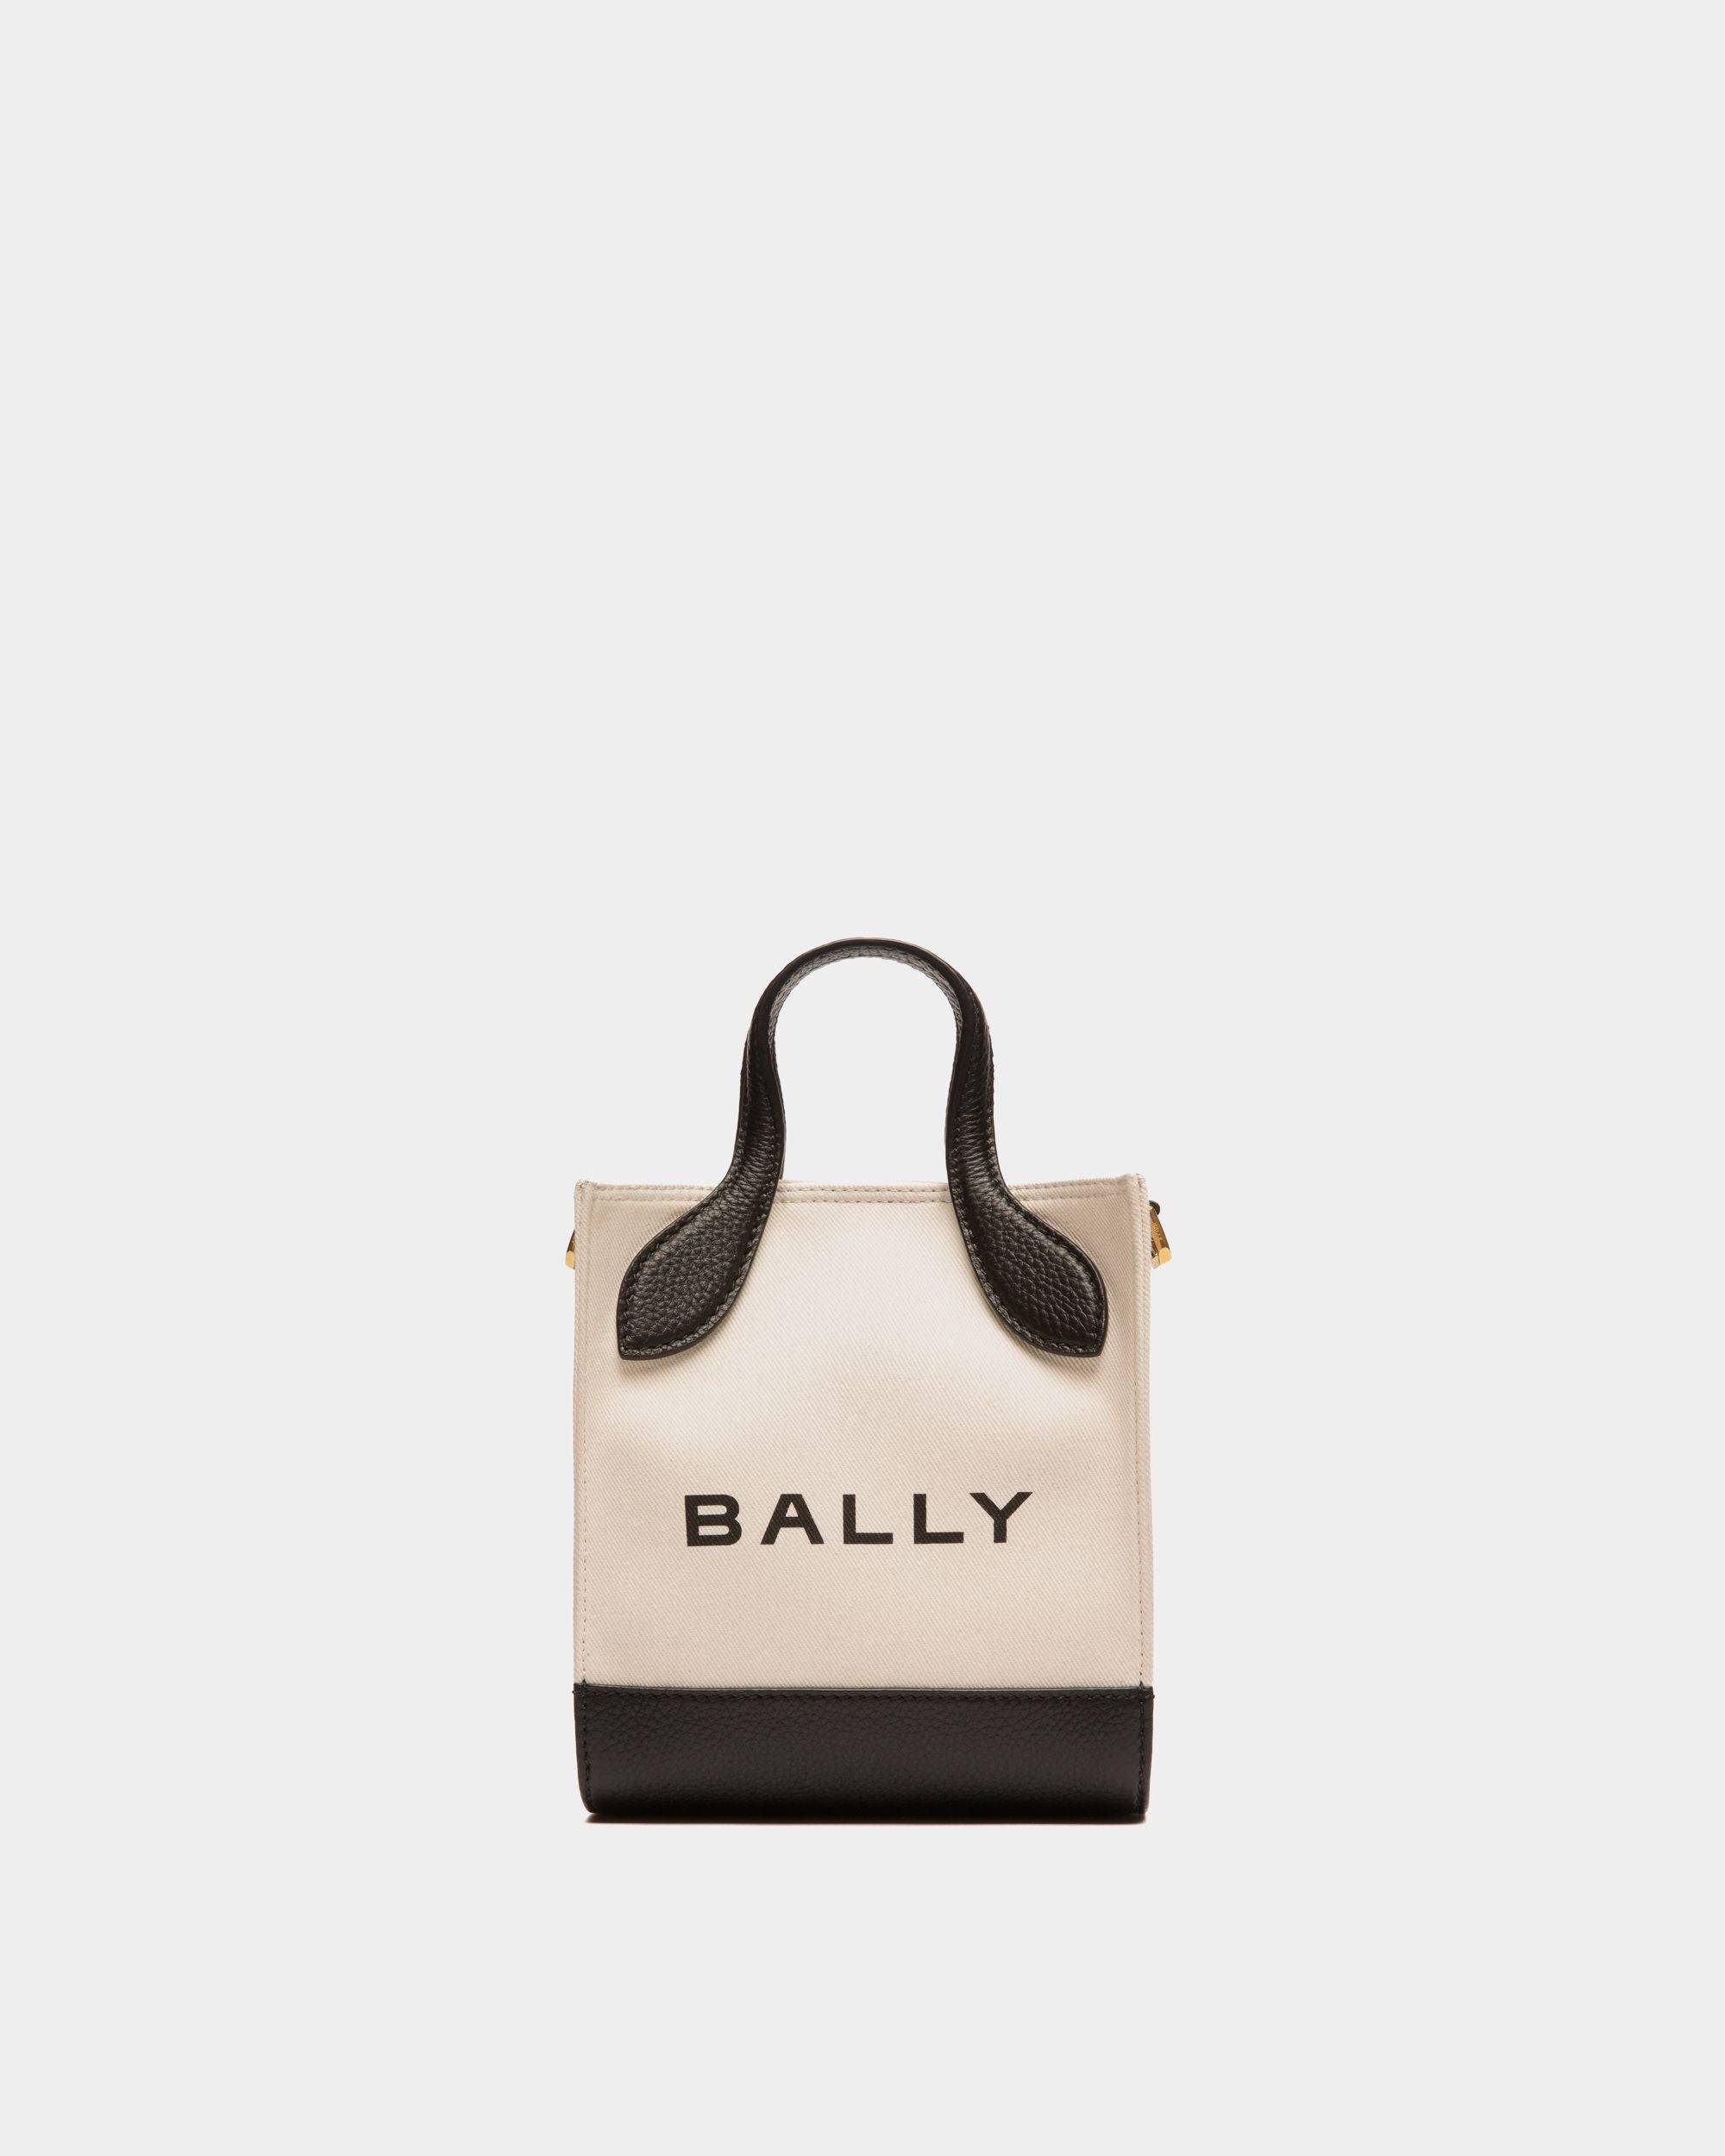 Bar | Women's Mini Tote Bag in Neutral And Black Canvas And Leather | Bally | Still Life Front